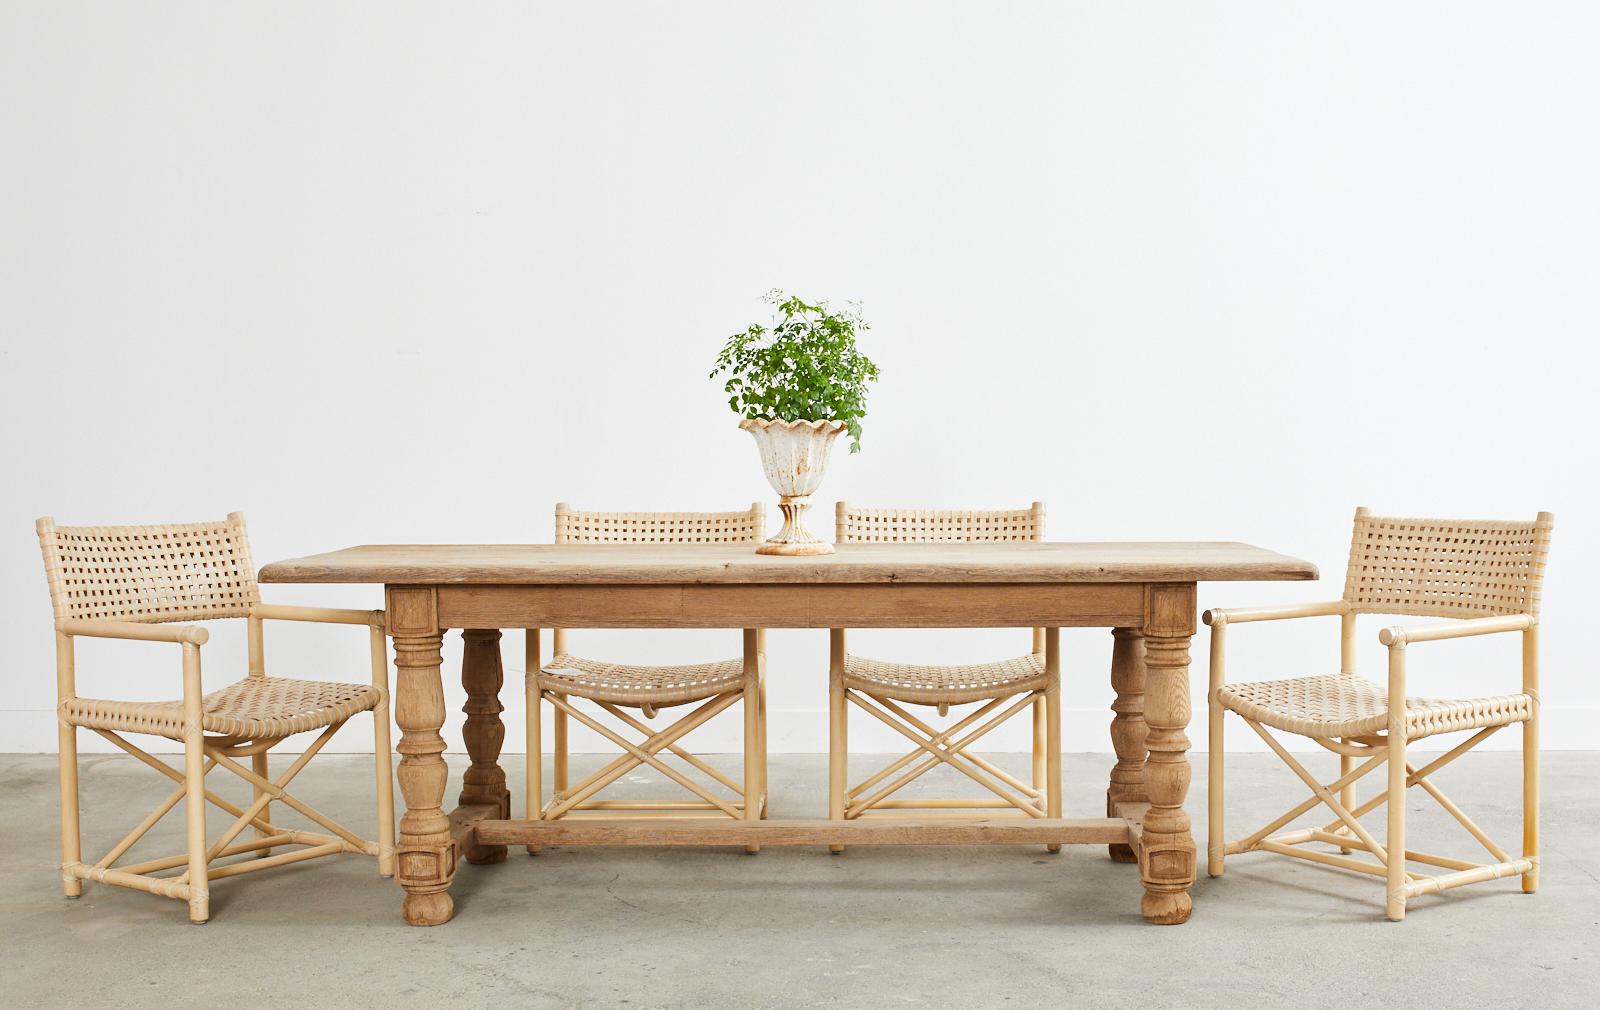 Rustic Country French farmhouse dining table featuring a weathered bleached oak finish with an amazing aged patina. Constructed with a 1.5-inch thick plank top supported by a trestle-style base. The turned legs are thick with chunky block joints